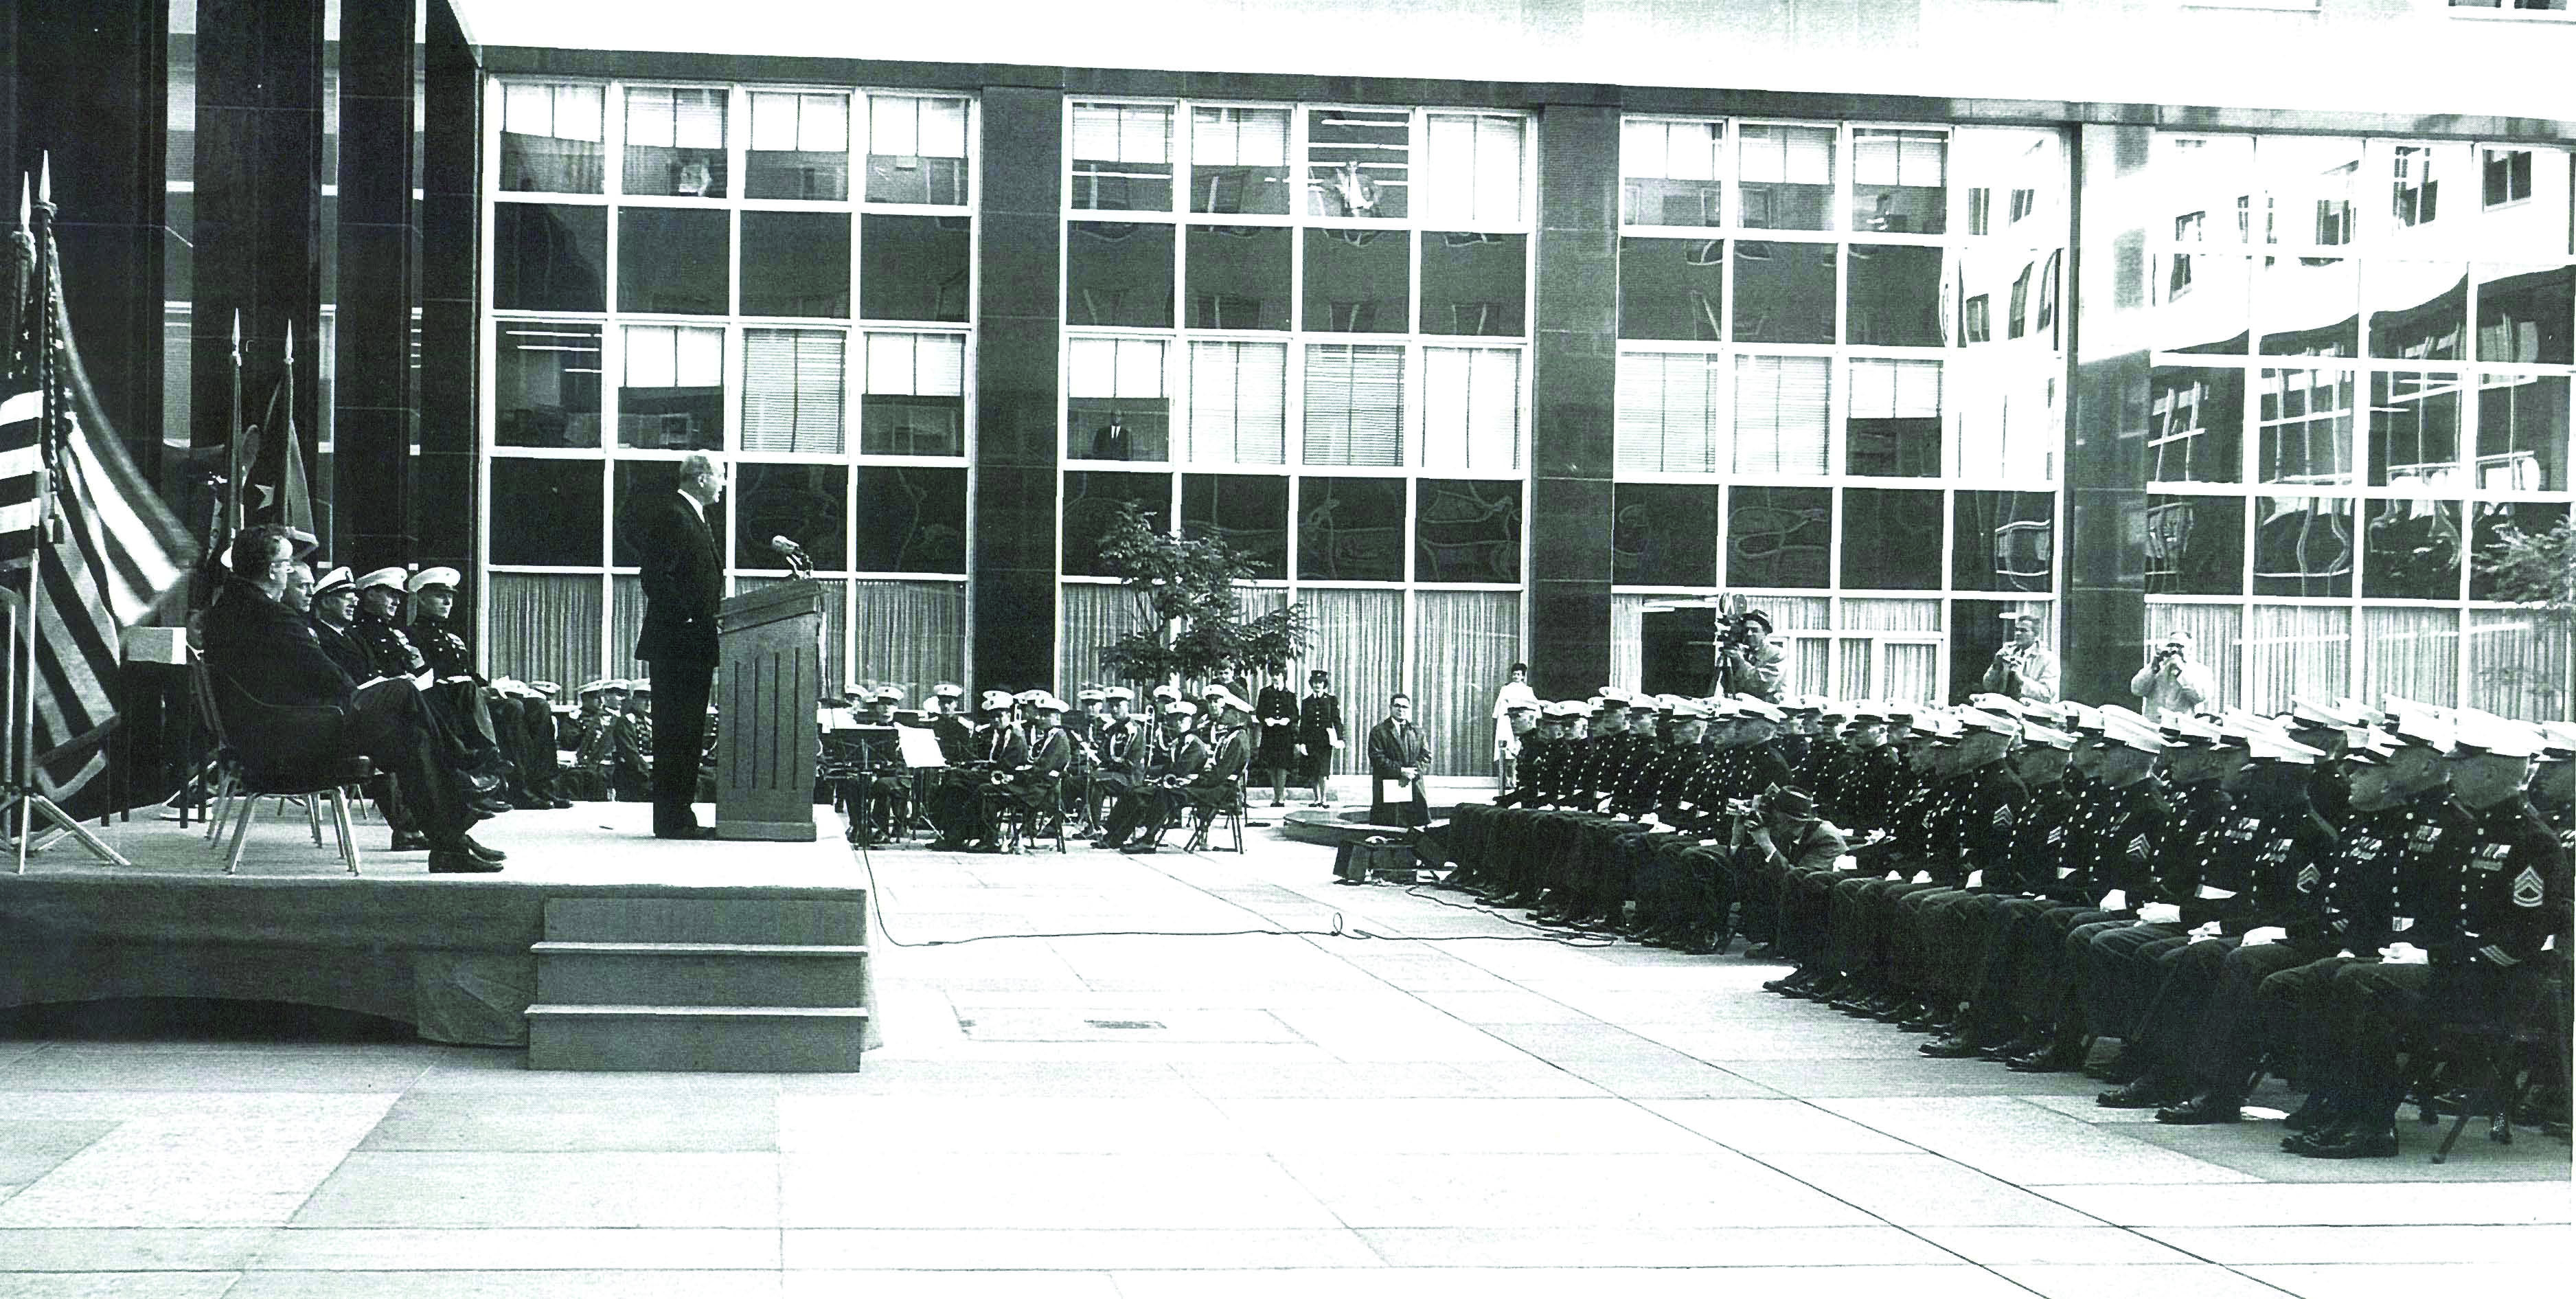 Secretary of State Dean Rusk speaks to a graduating class of Marine Security Guards (MSG). During the 1950s, the Department and the Marine Corps made significant changes to the MSG training program, including the addition of an on-the-job component (at Main State) and the development of a Marine Security Guard Handbook. Source: Department of State Records, National Archives and Records Administration.